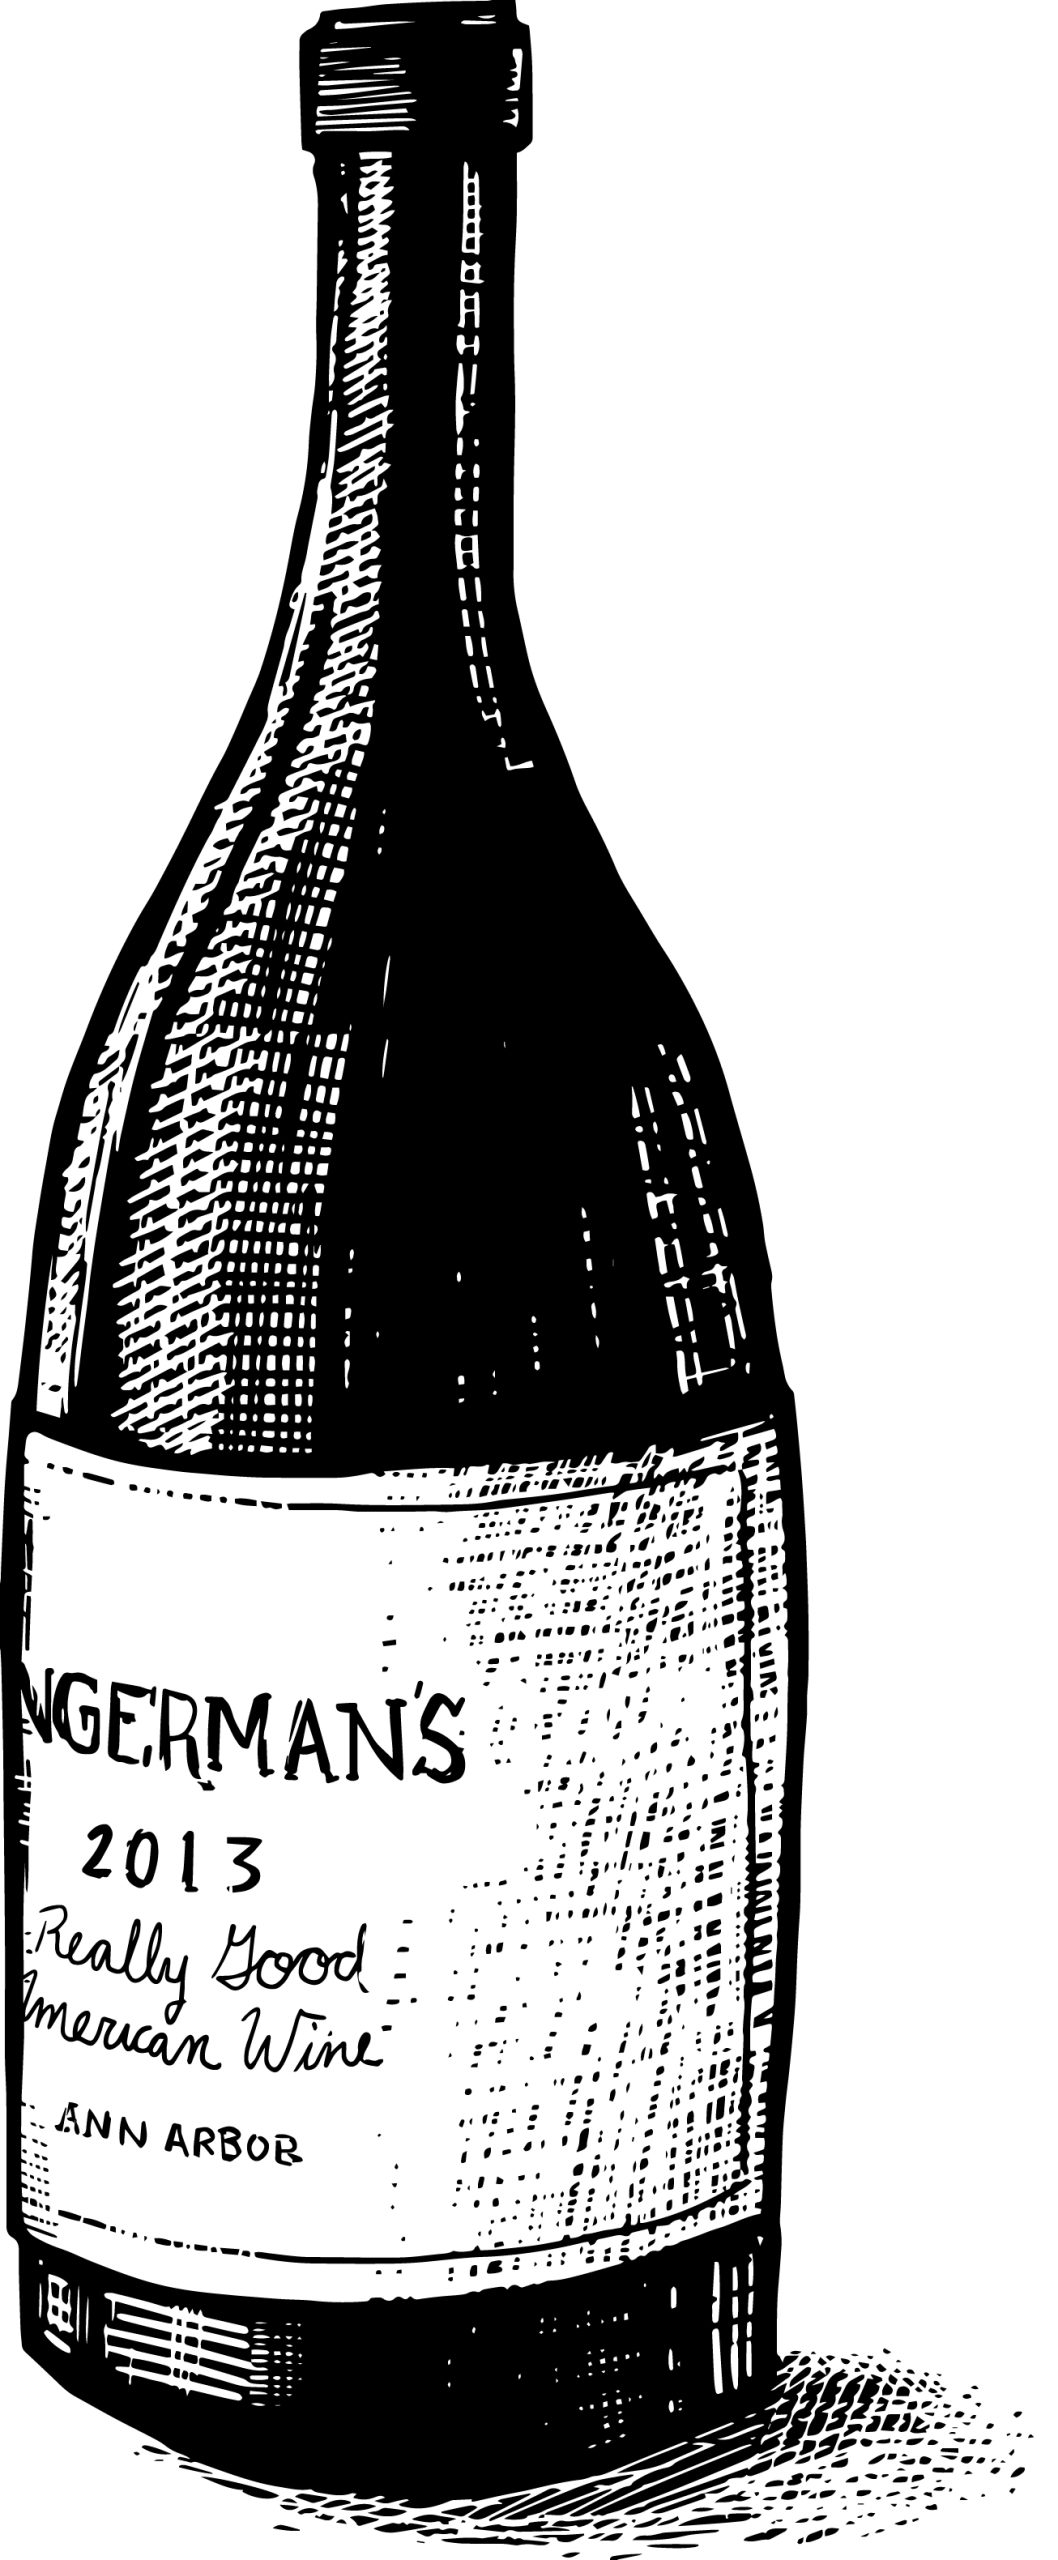 A sketch of a bottle of wine with a label that reads " Zingerman's 2013, Really Good American Wine"